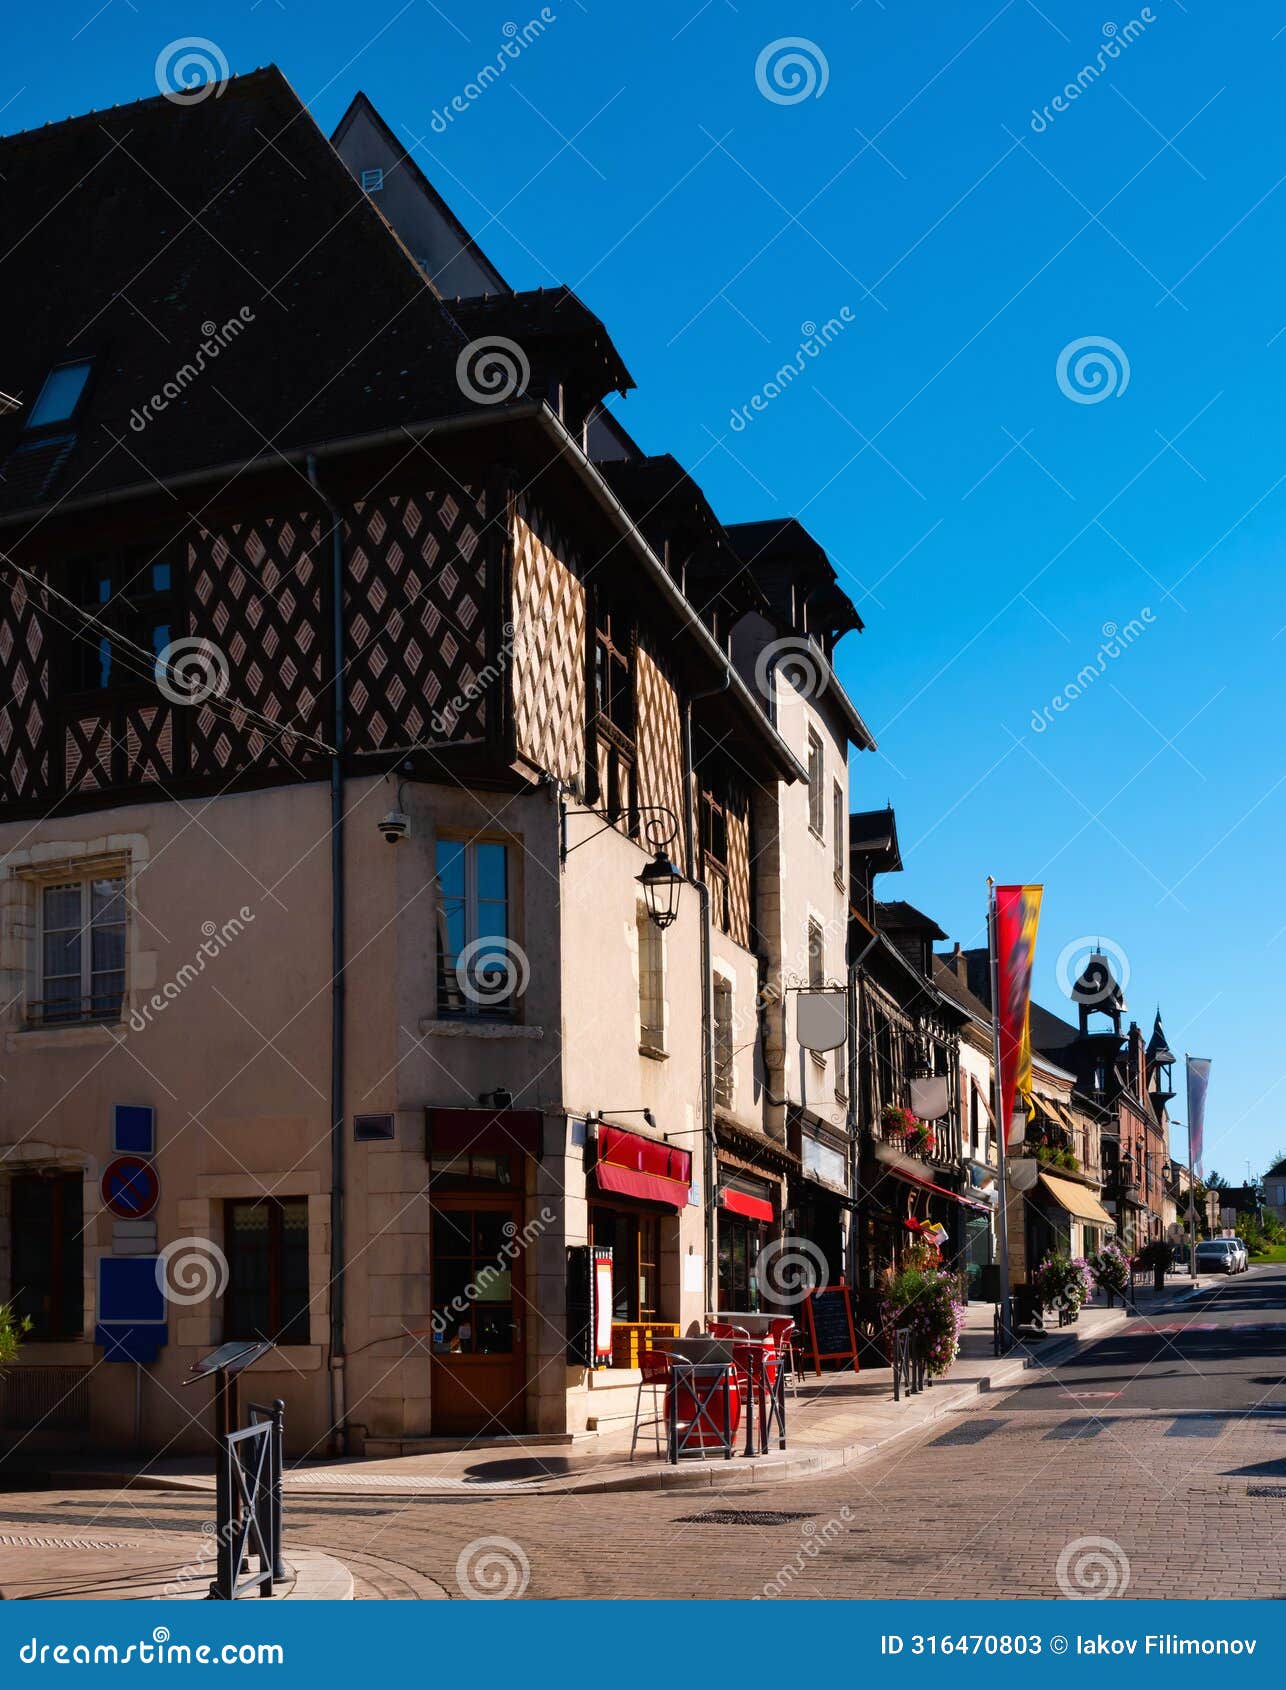 streets of town and commune aubigny-sur-nere